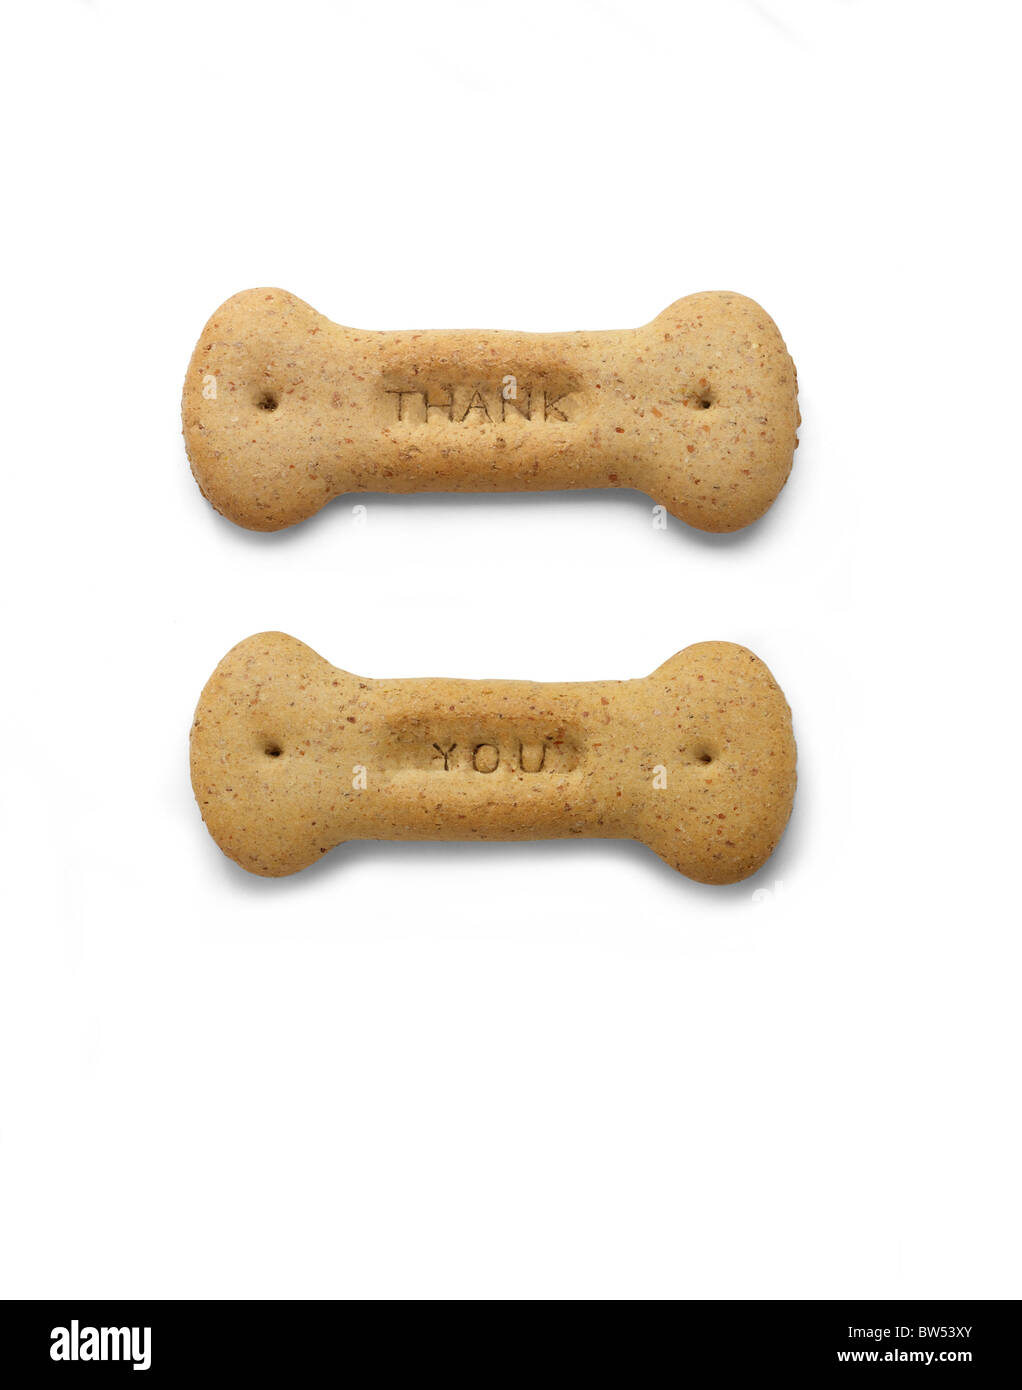 Dog biscuits saying 'thank you' Stock Photo